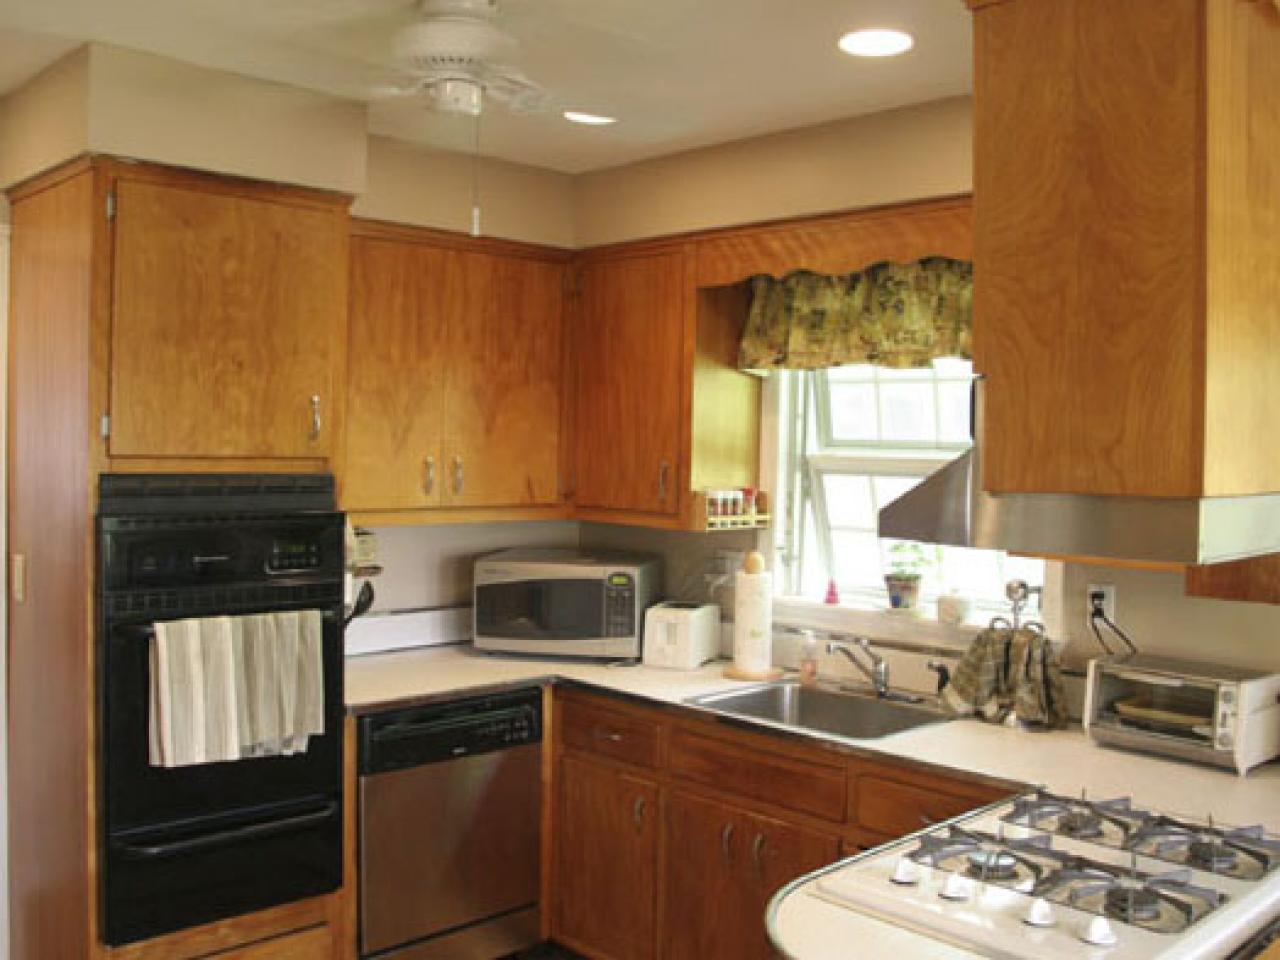 Kitchen Cabinets A Makeover, How Do I Stain My Kitchen Cabinets